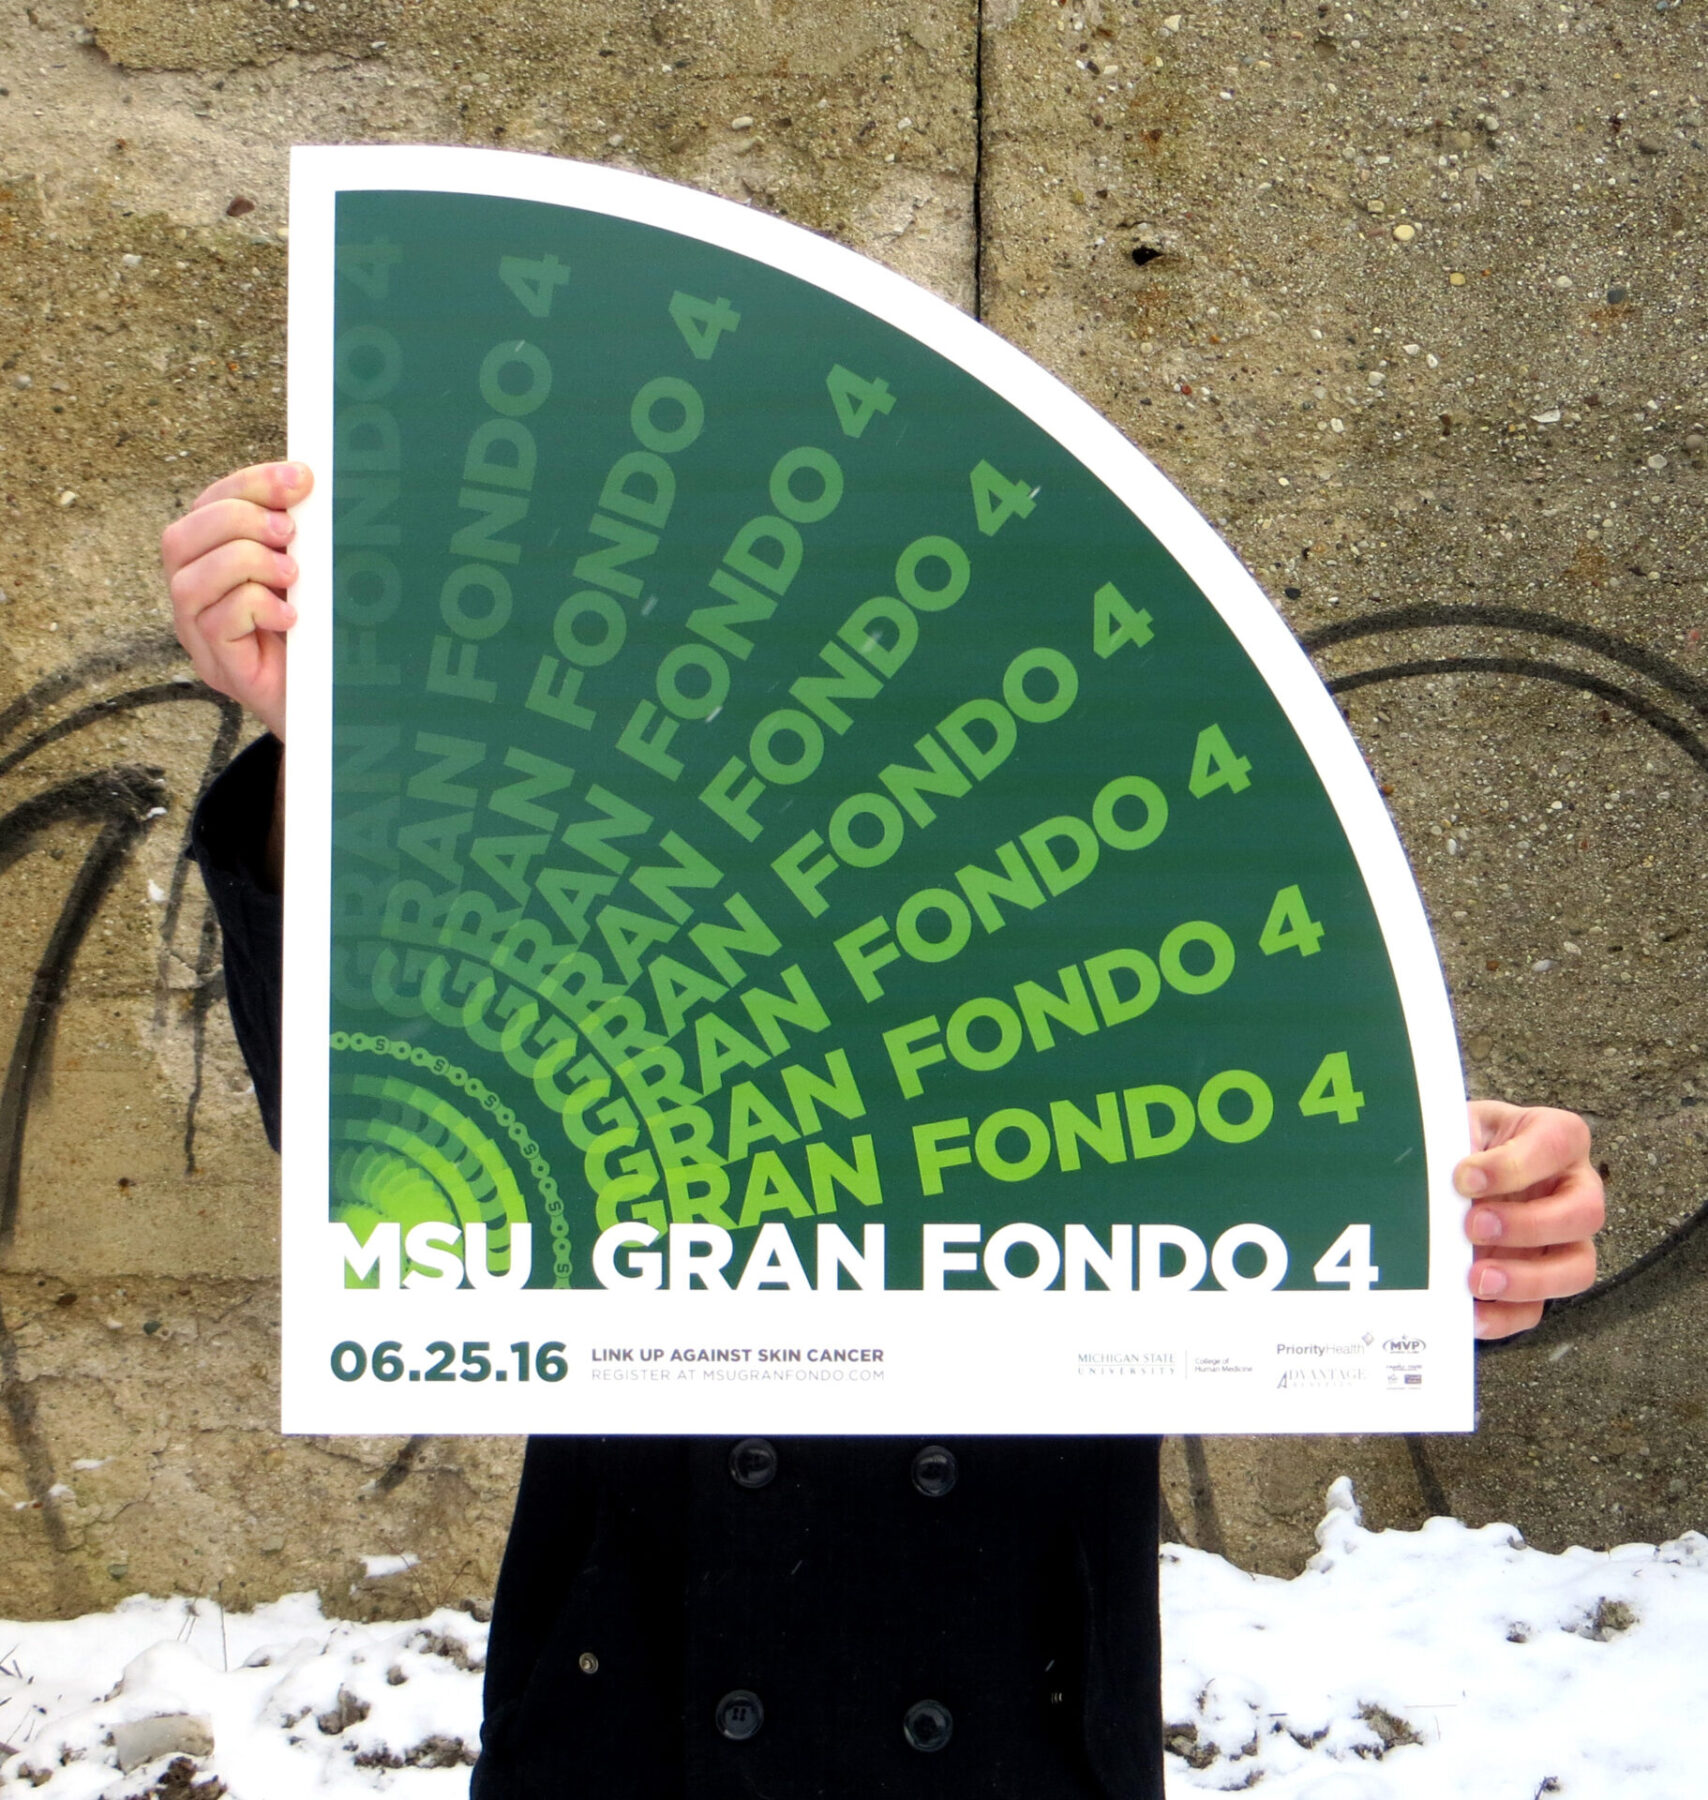 Person holding the MSU Gran Fondo 4 event promotional poster in front of a concrete wall.